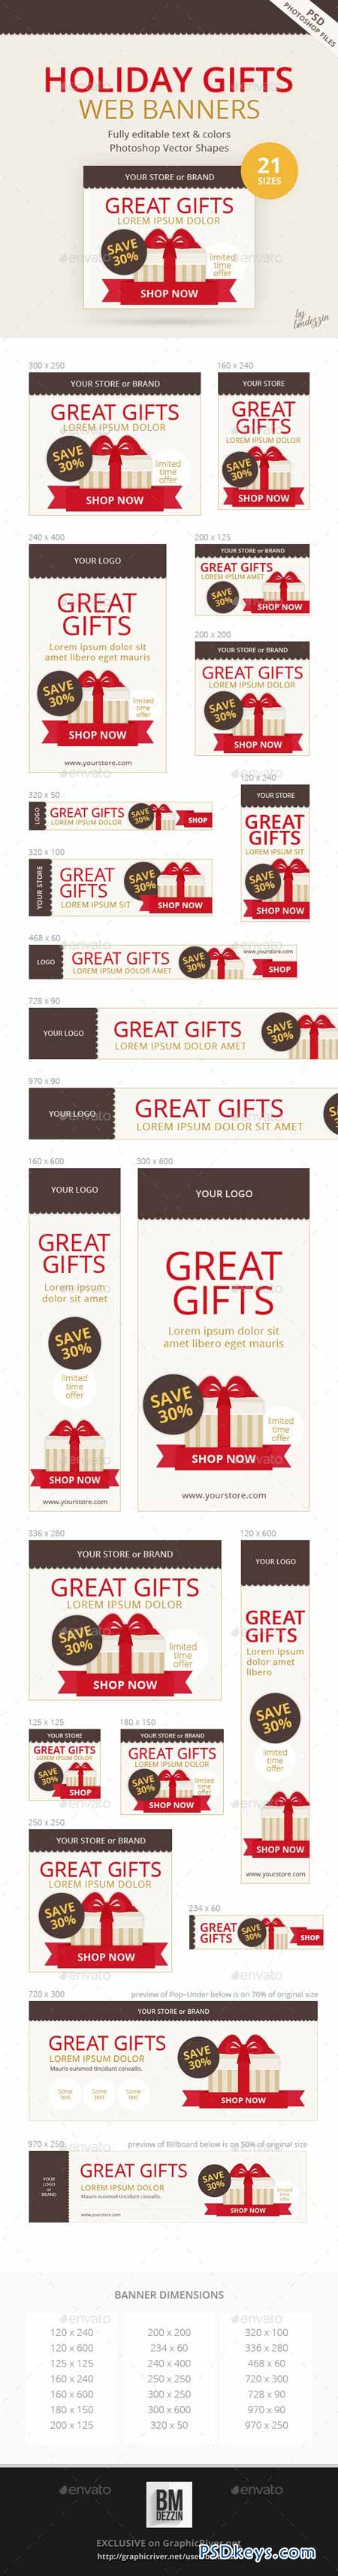 Holiday Gifts Web Banners 9512338